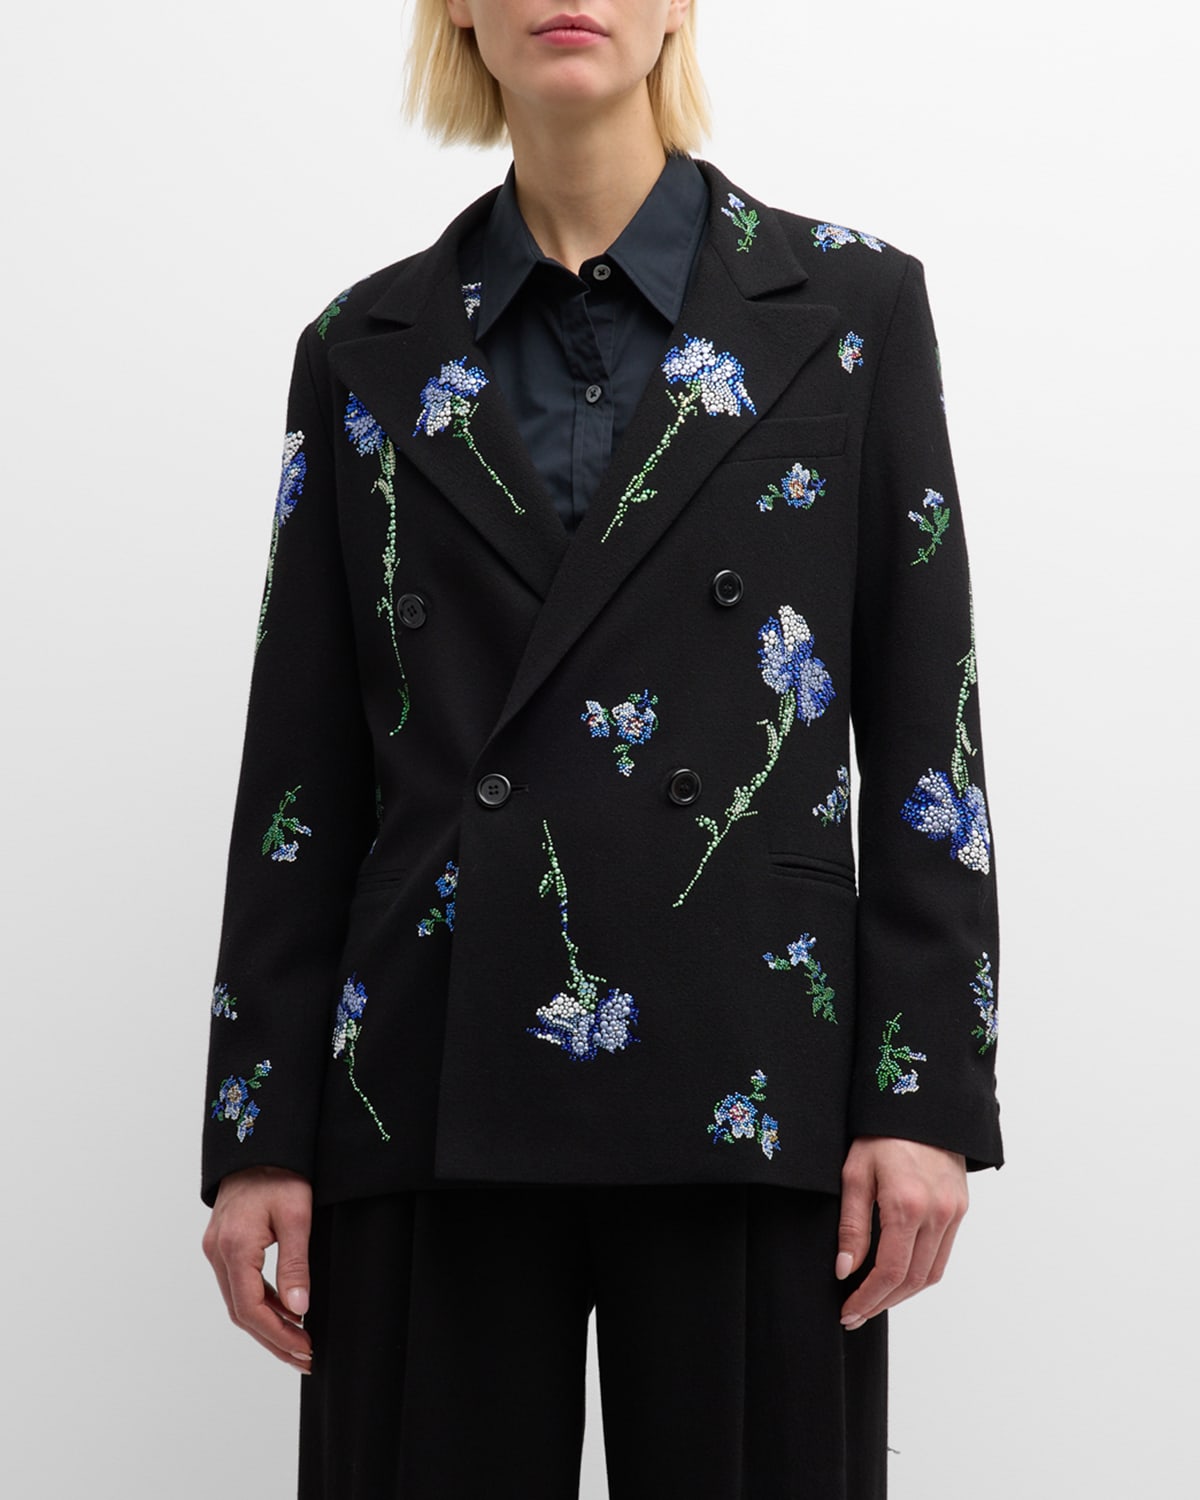 Libertine Cecil Beaton Carnation Double-breasted Jacket In Black